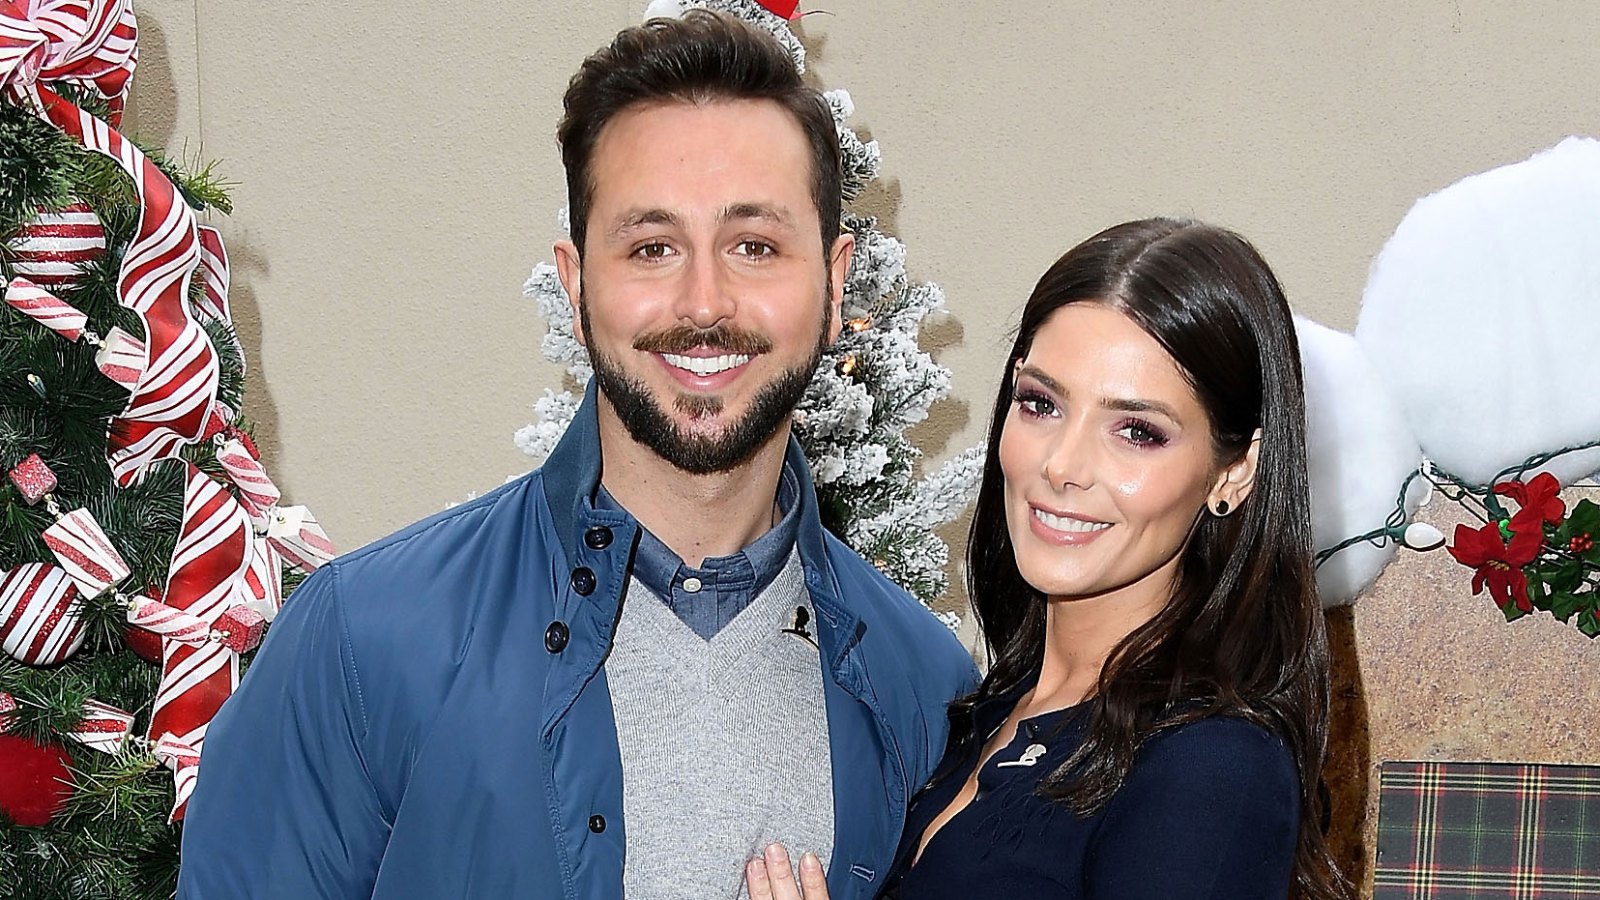 Ashley Greene Gushes About Married Life: ‘It’s Been Really Wonderful’